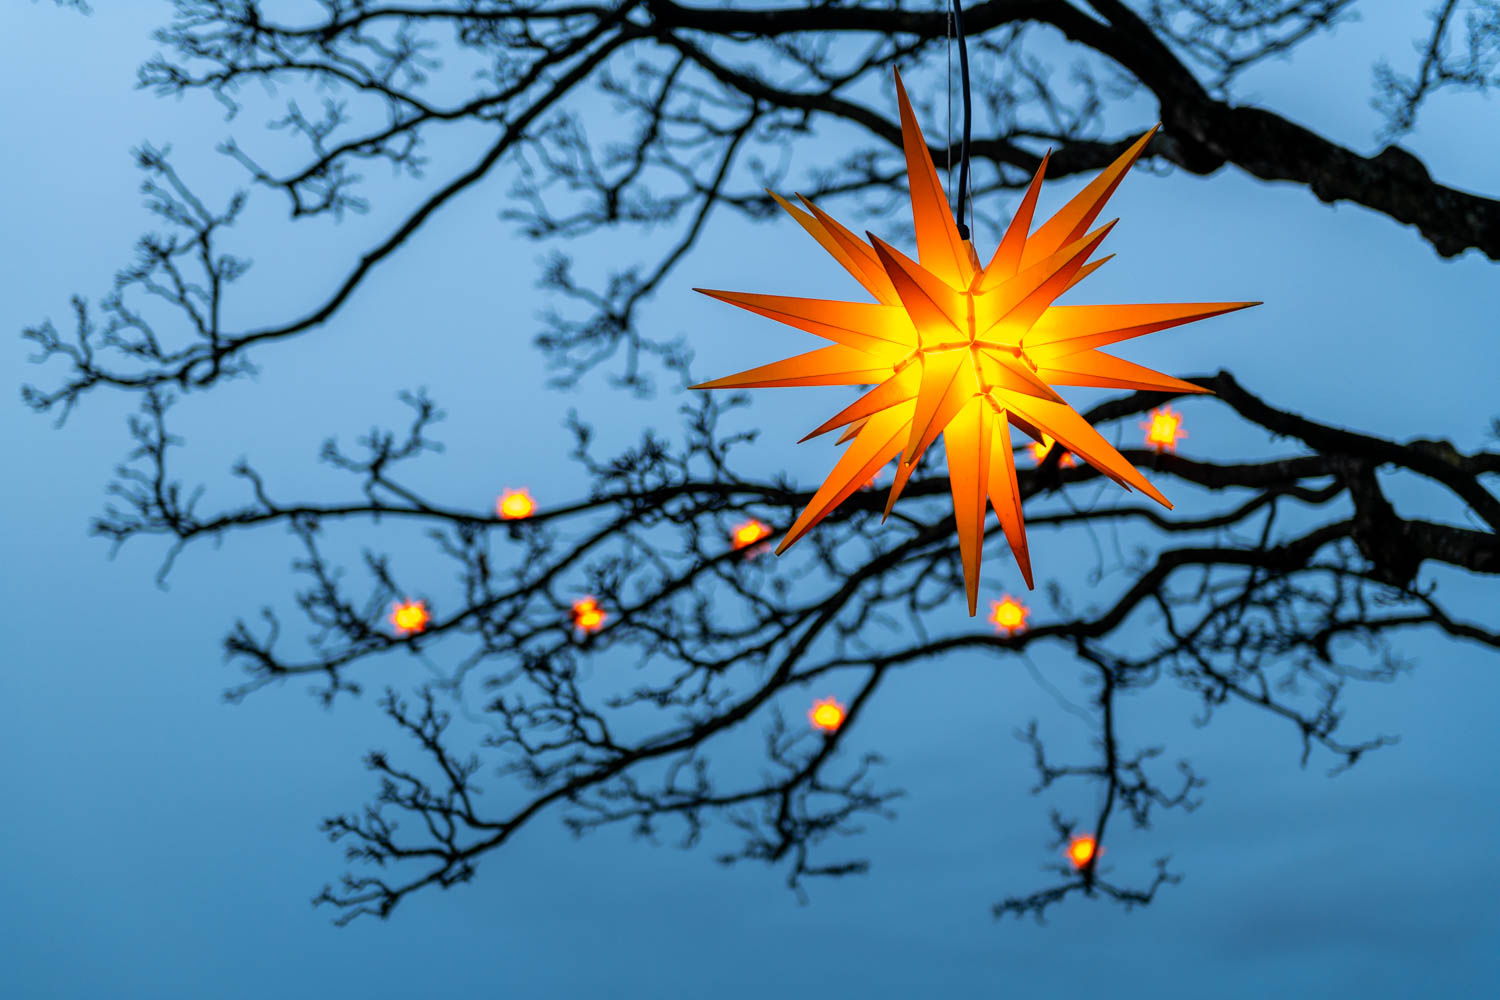 Sharing festive cheer – are holiday messages valuable LinkedIn content?